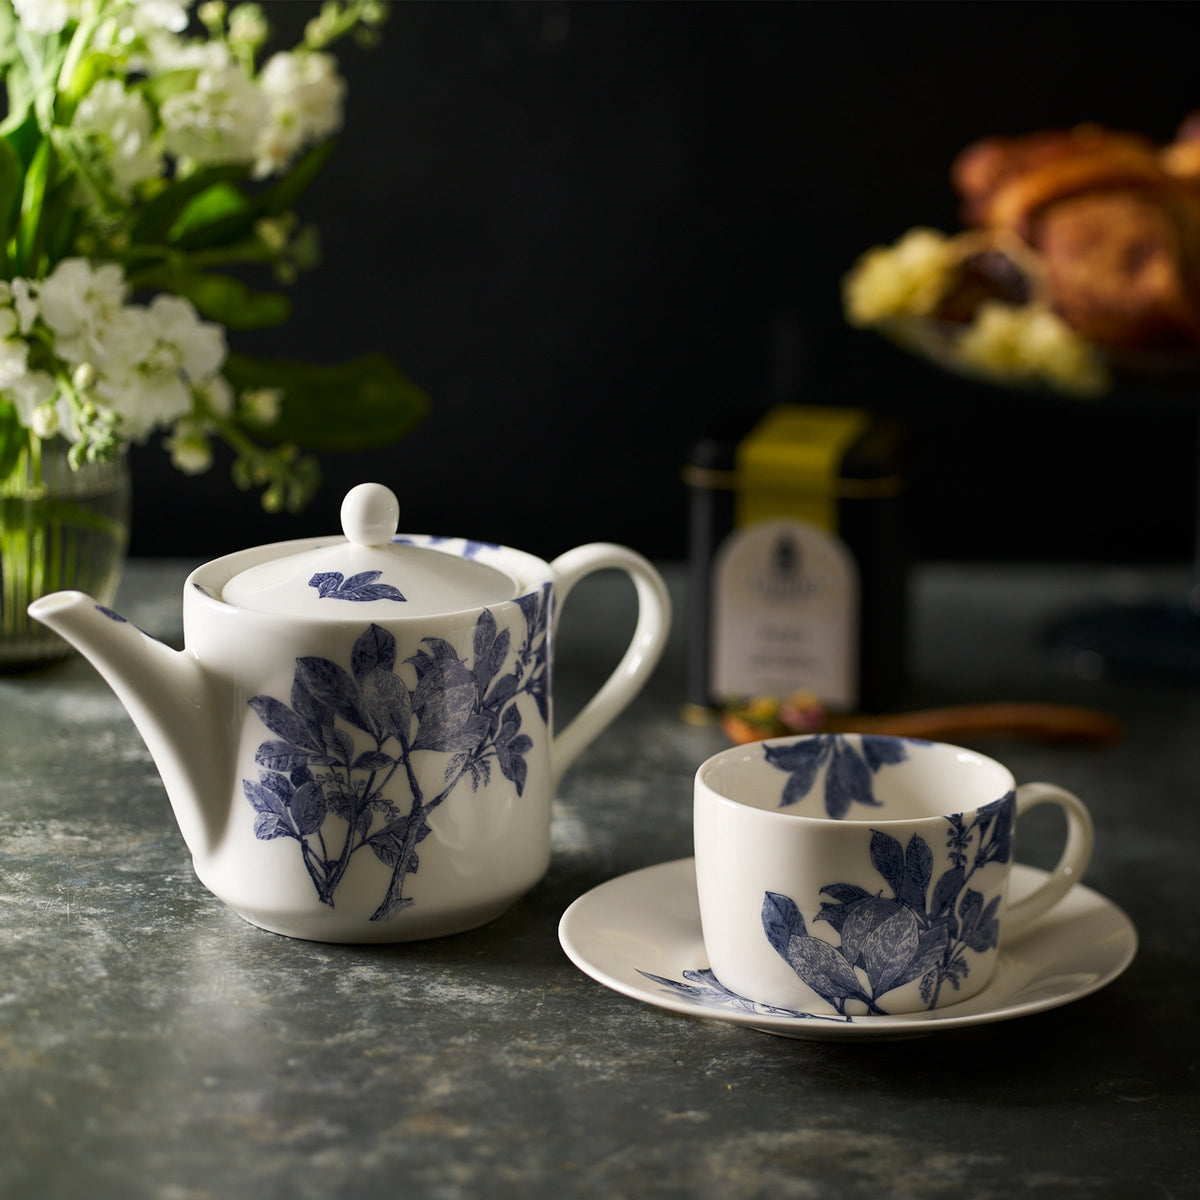 A white porcelain teapot and Caskata Artisanal Home&#39;s Arbor Cups &amp; Saucers, Set of 2 with blue leaf designs, part of a stunning bone china collection, are on a countertop. A vase of flowers, a tin canister, and a plate with baked goods are in the background.